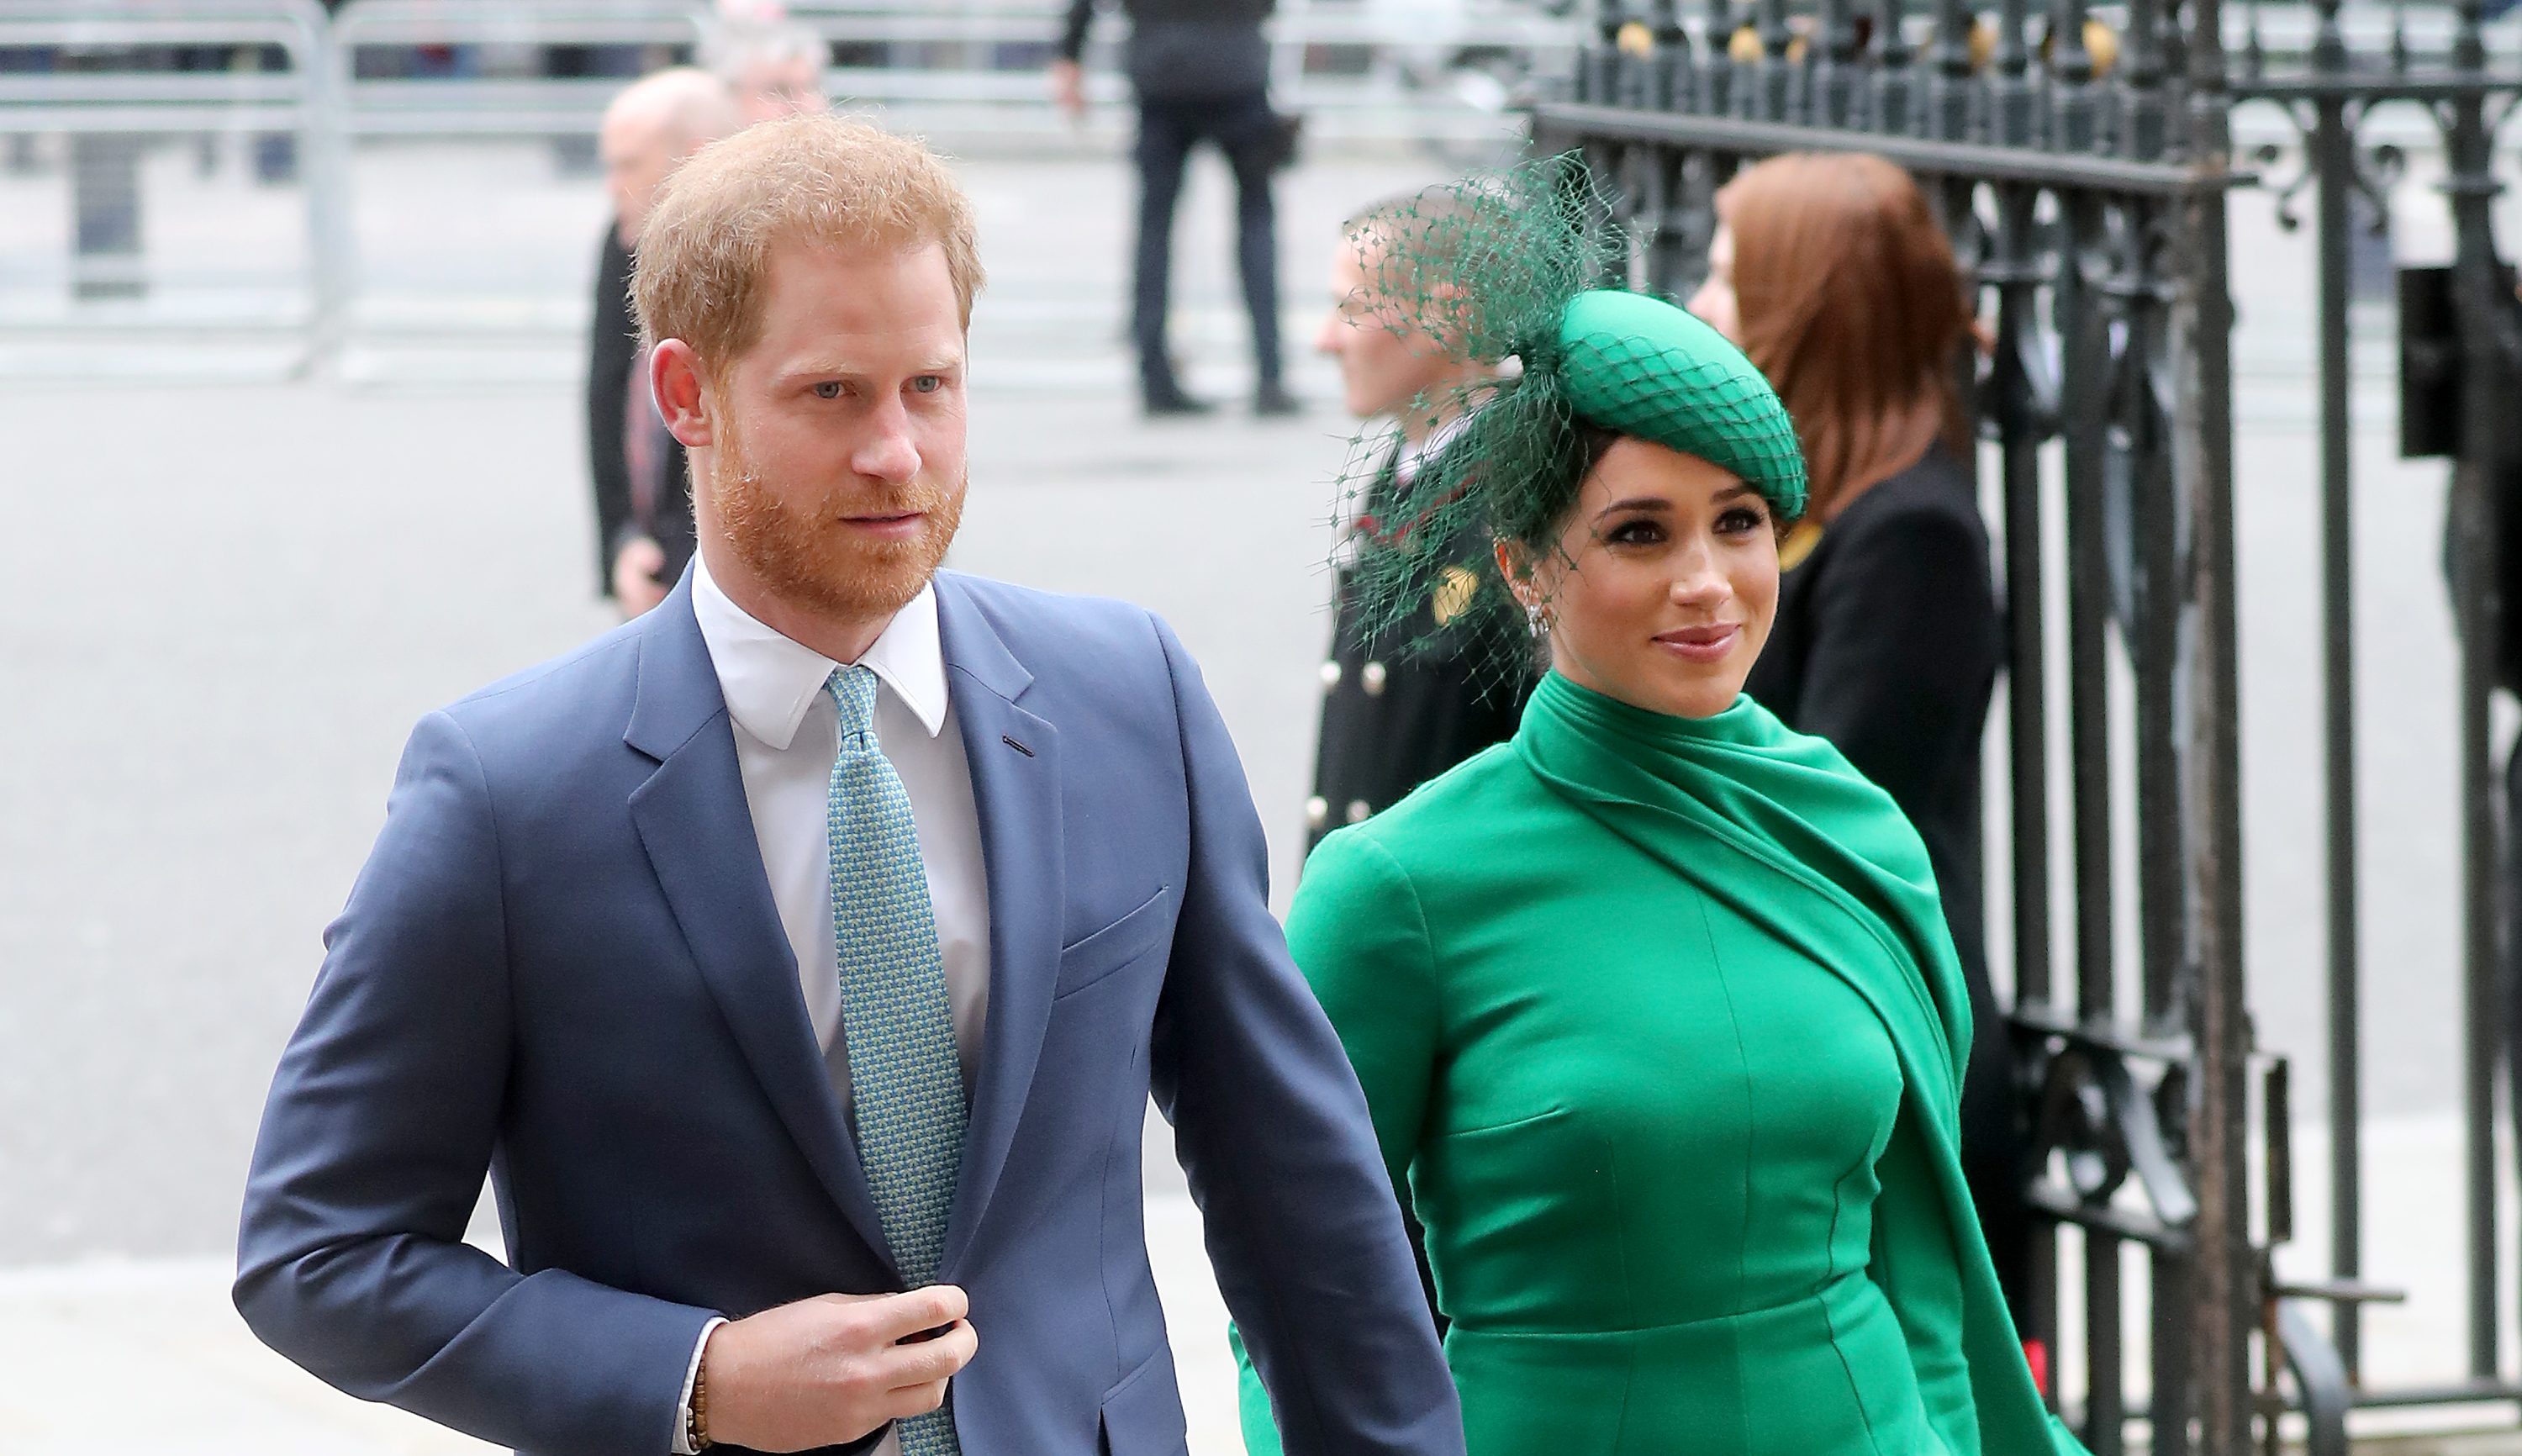 Prince Harry, Duke of Sussex with his wife Meghan, Duchess of Sussex